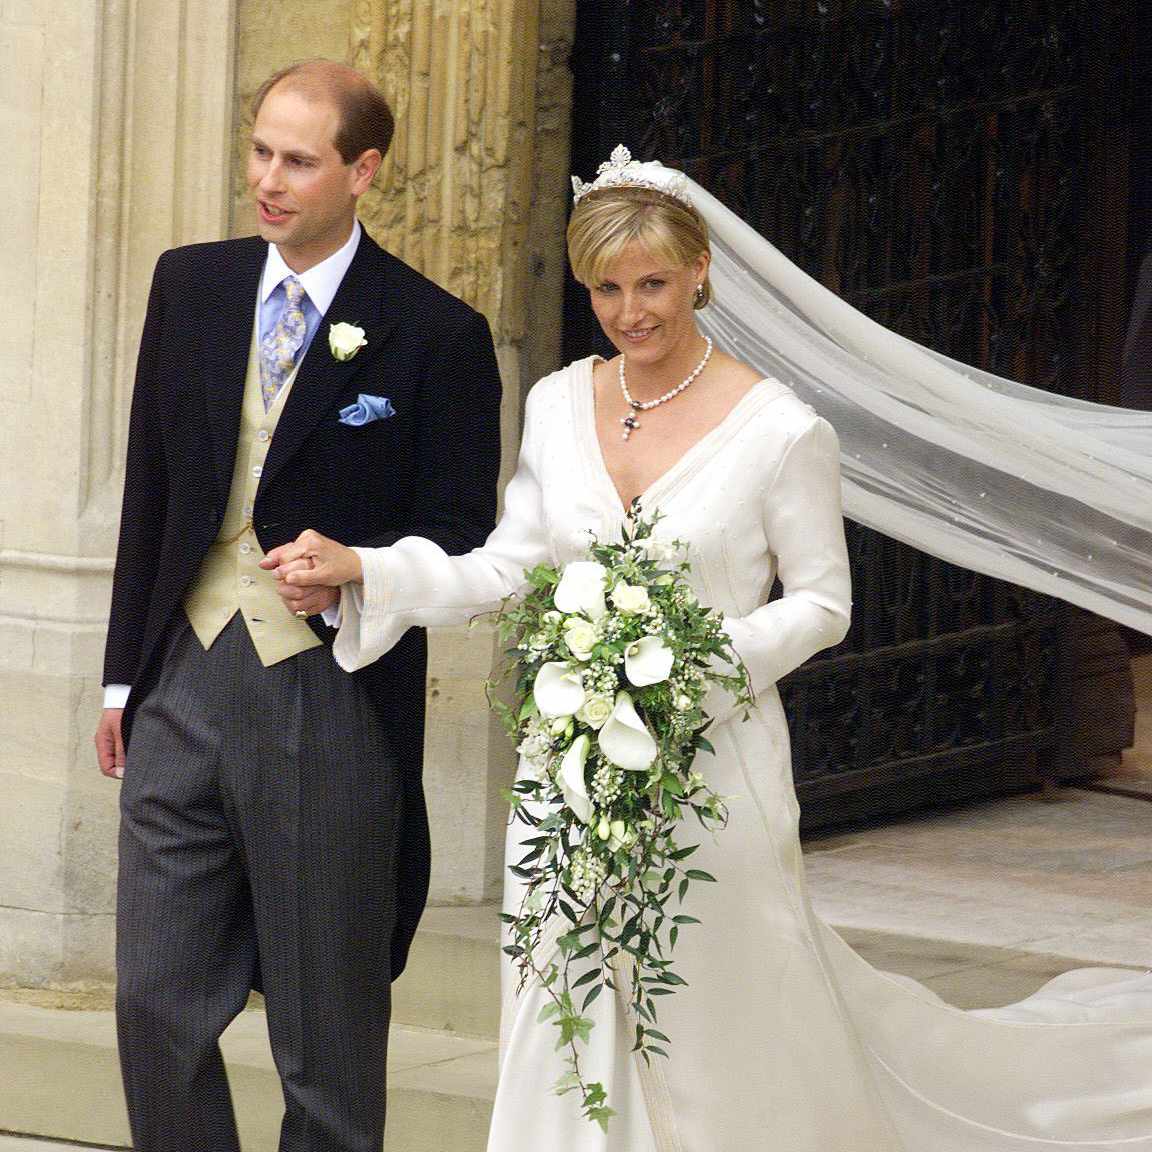 Prince Edward and Sophie Wessex Holding Hands and Walking Out of Church in Wedding Attire